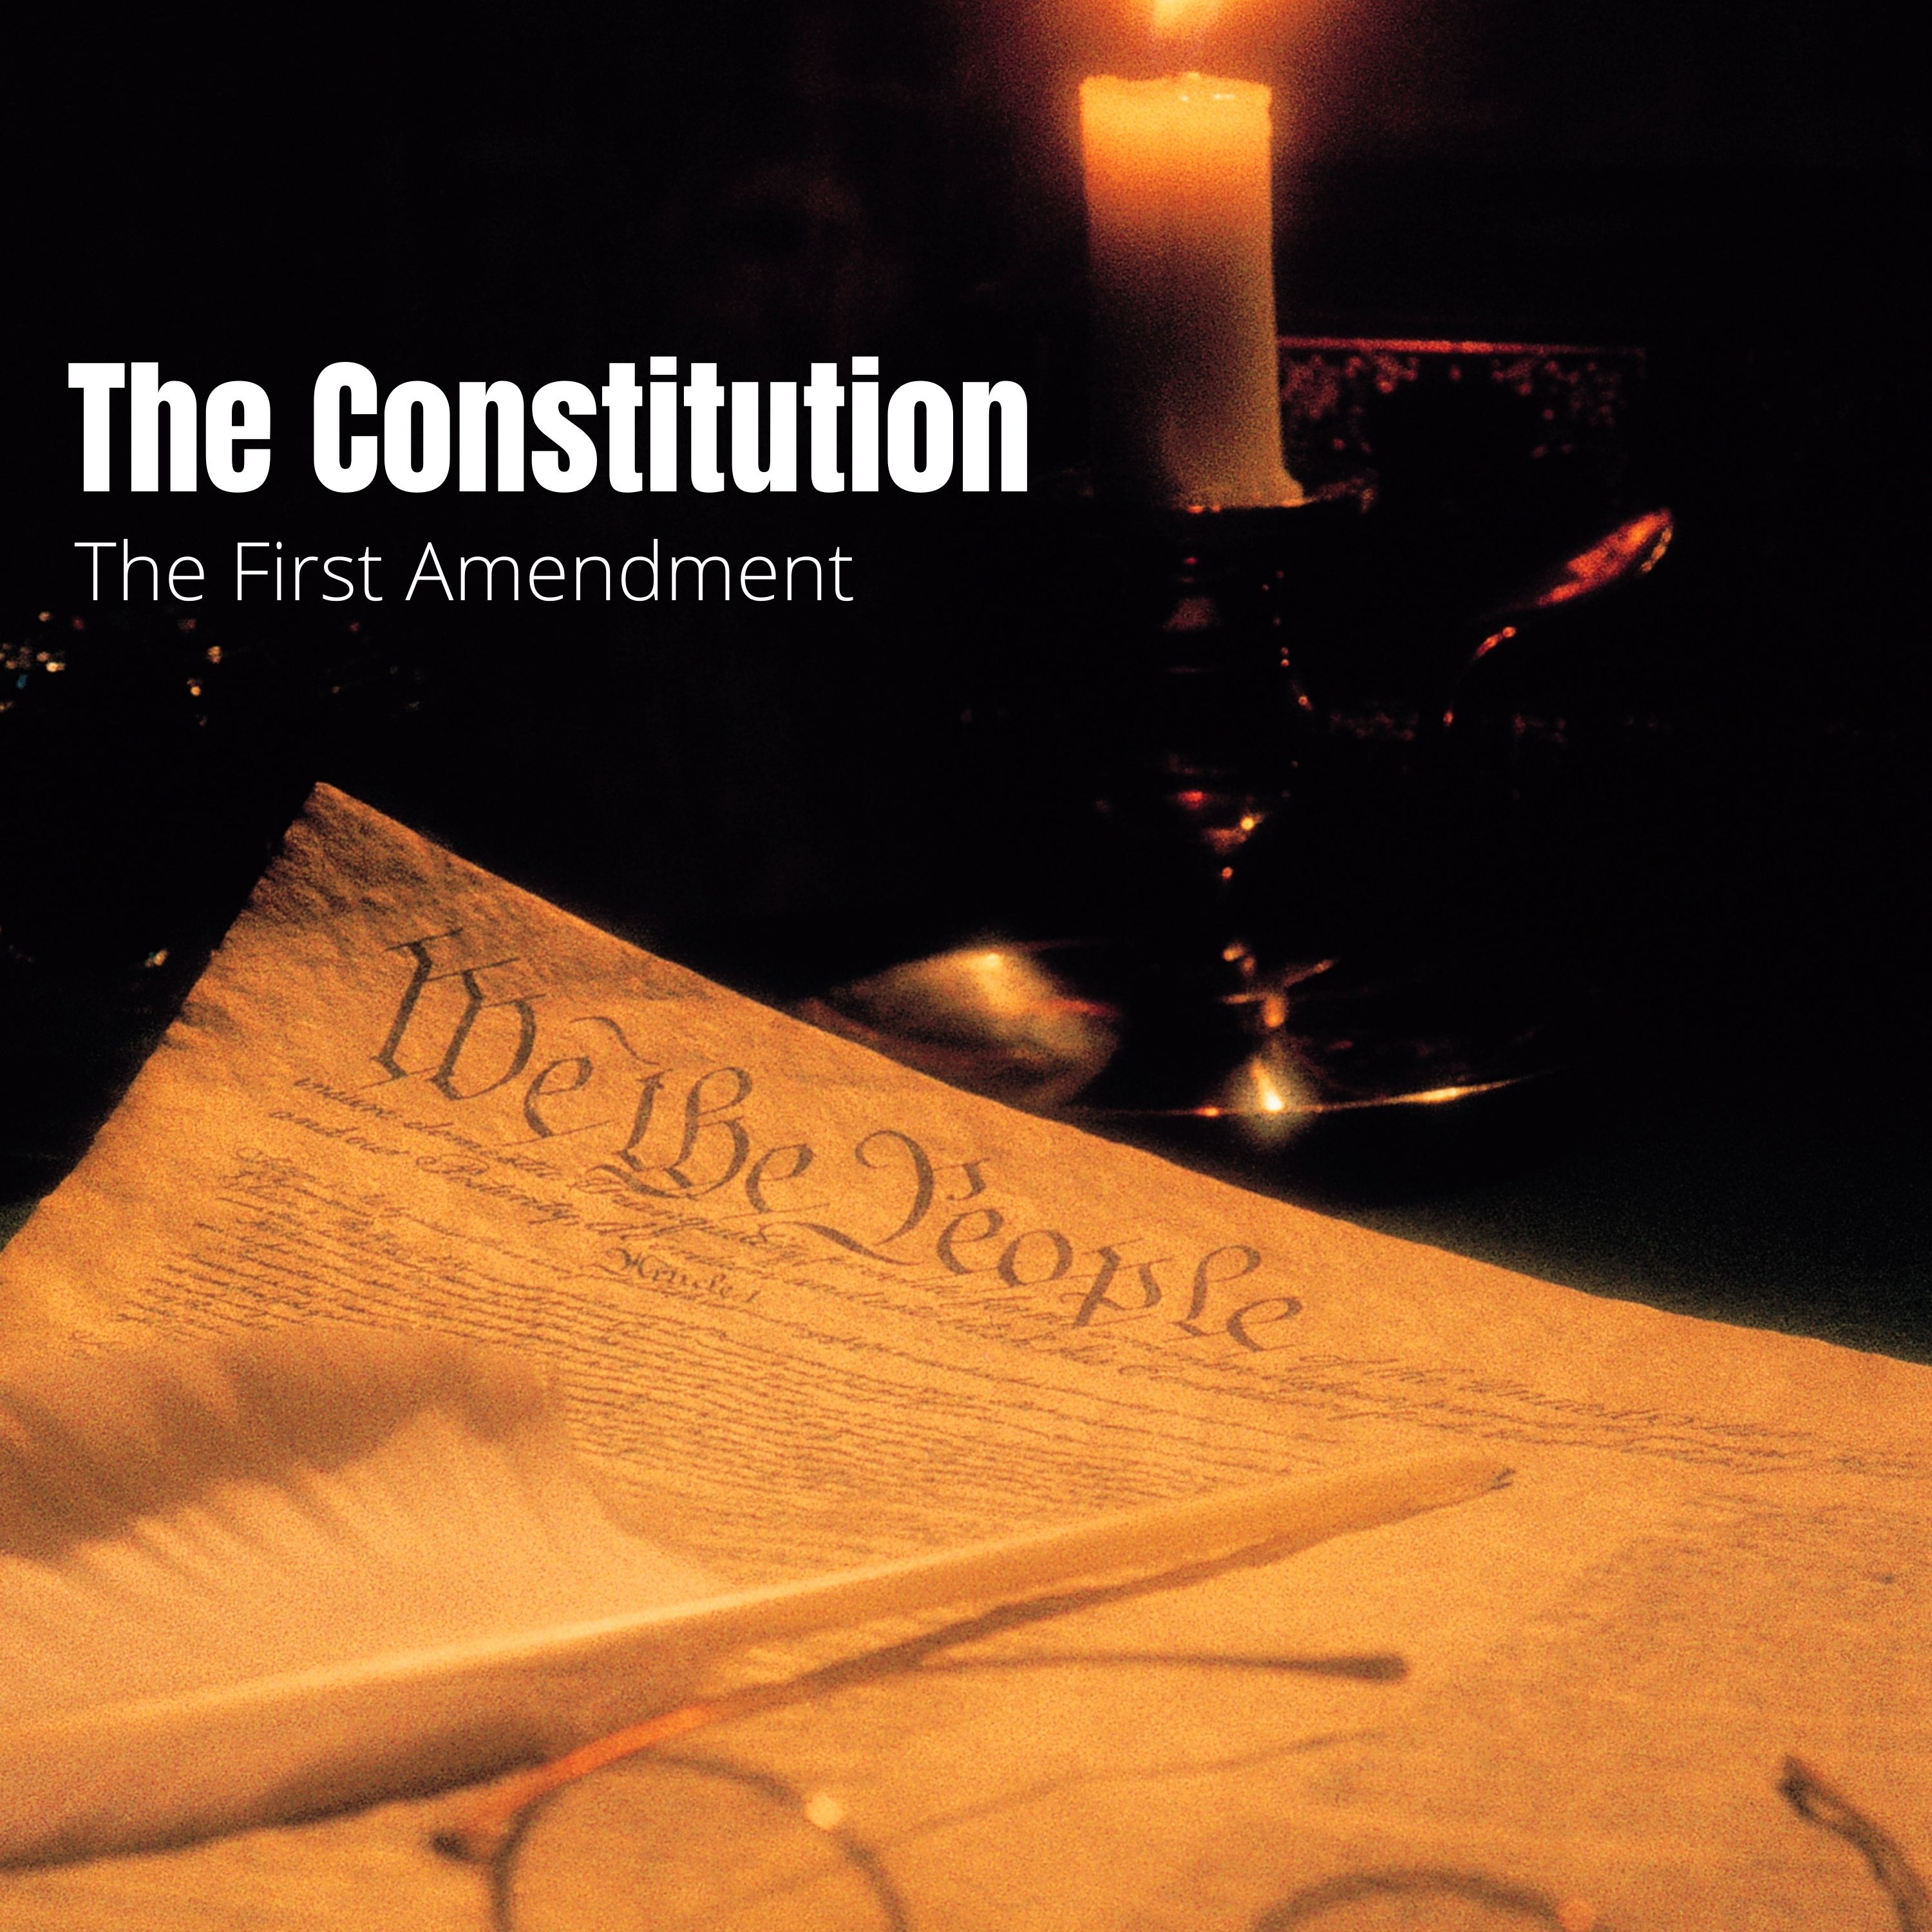 Constitutional Law - Lecture Eight: The First Amendment